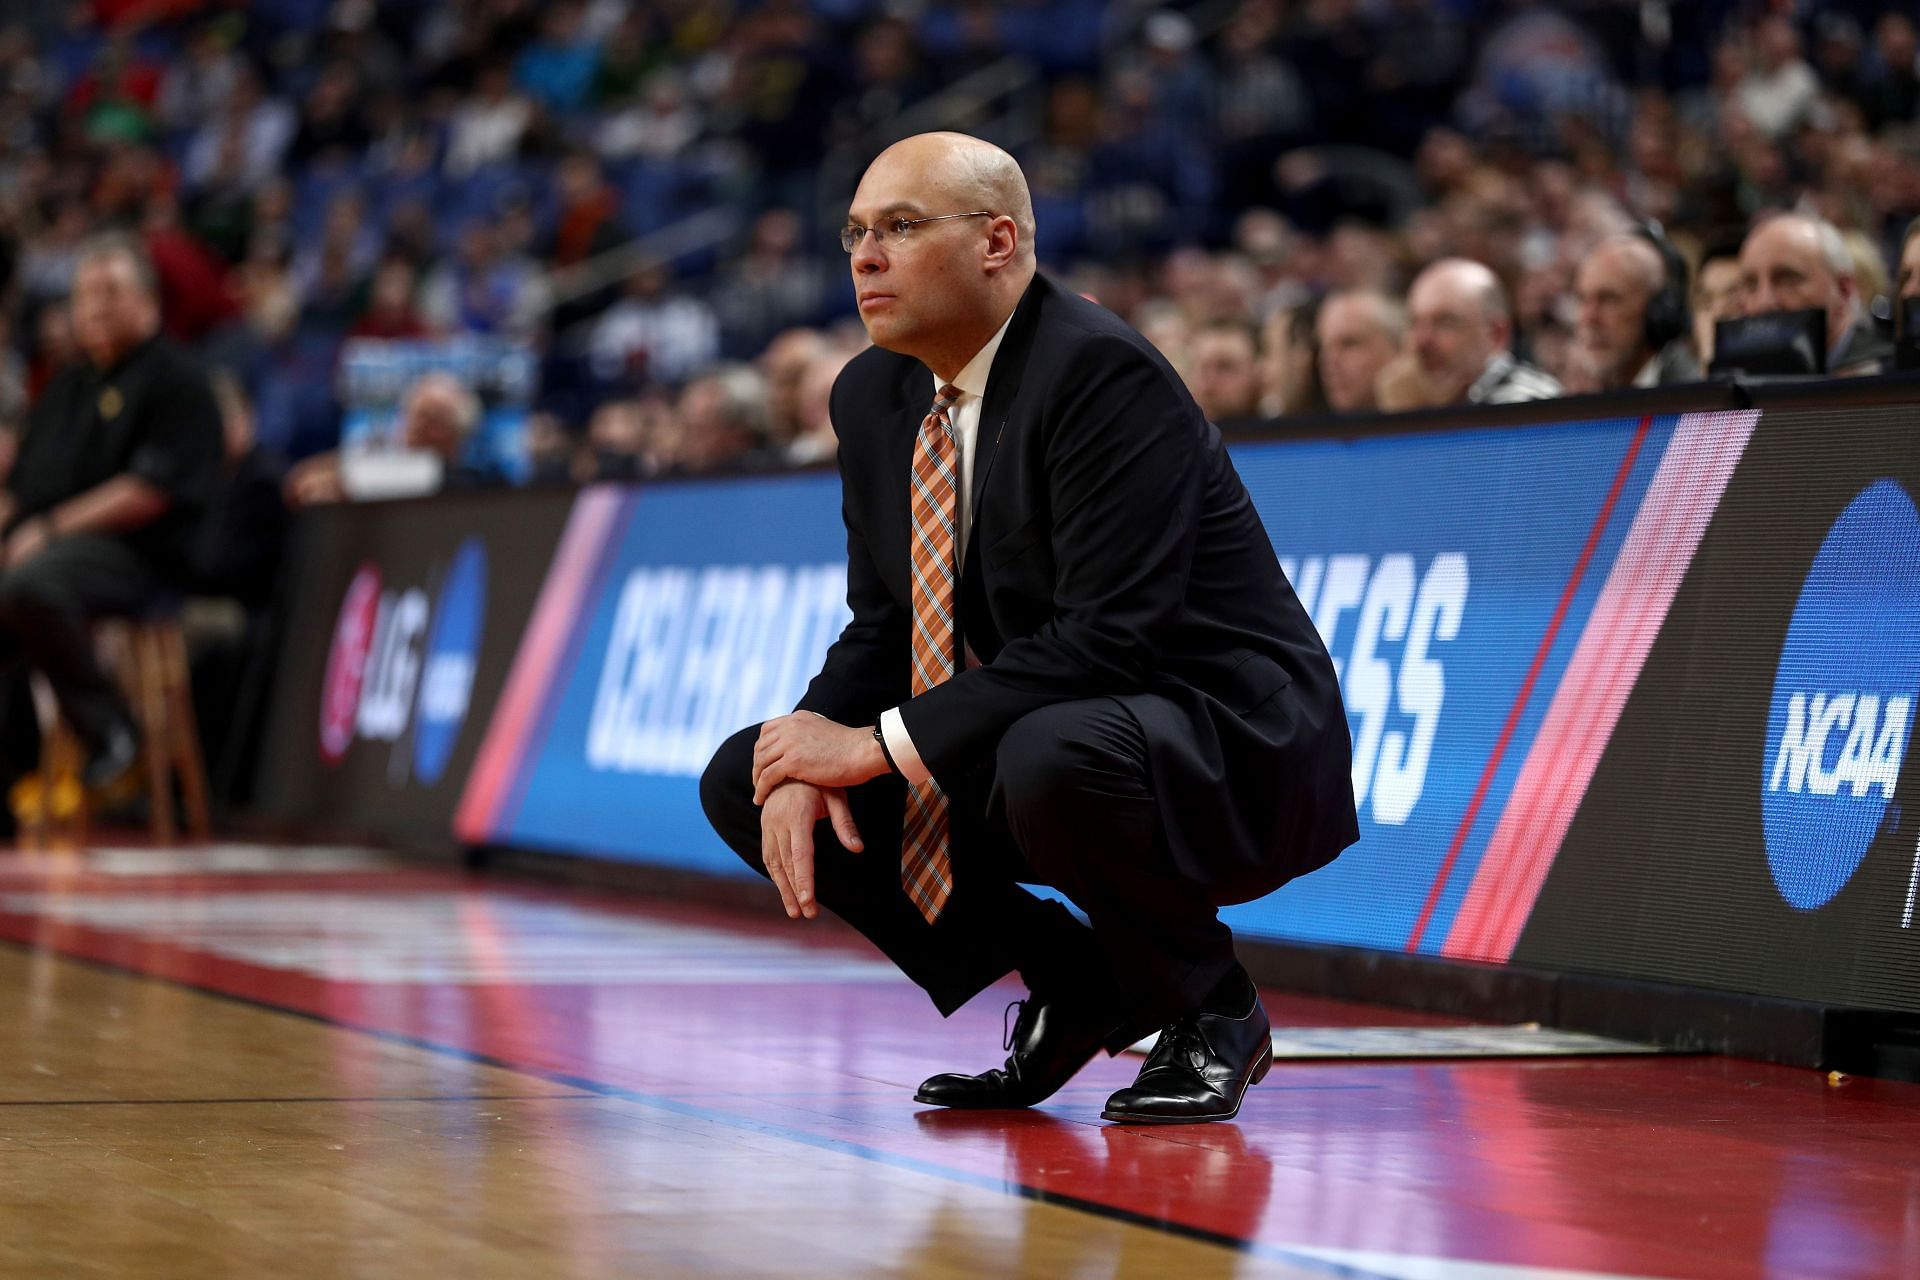 Nathan Davis coaches Bucknell against West Virginia in the NCAA Tournament.